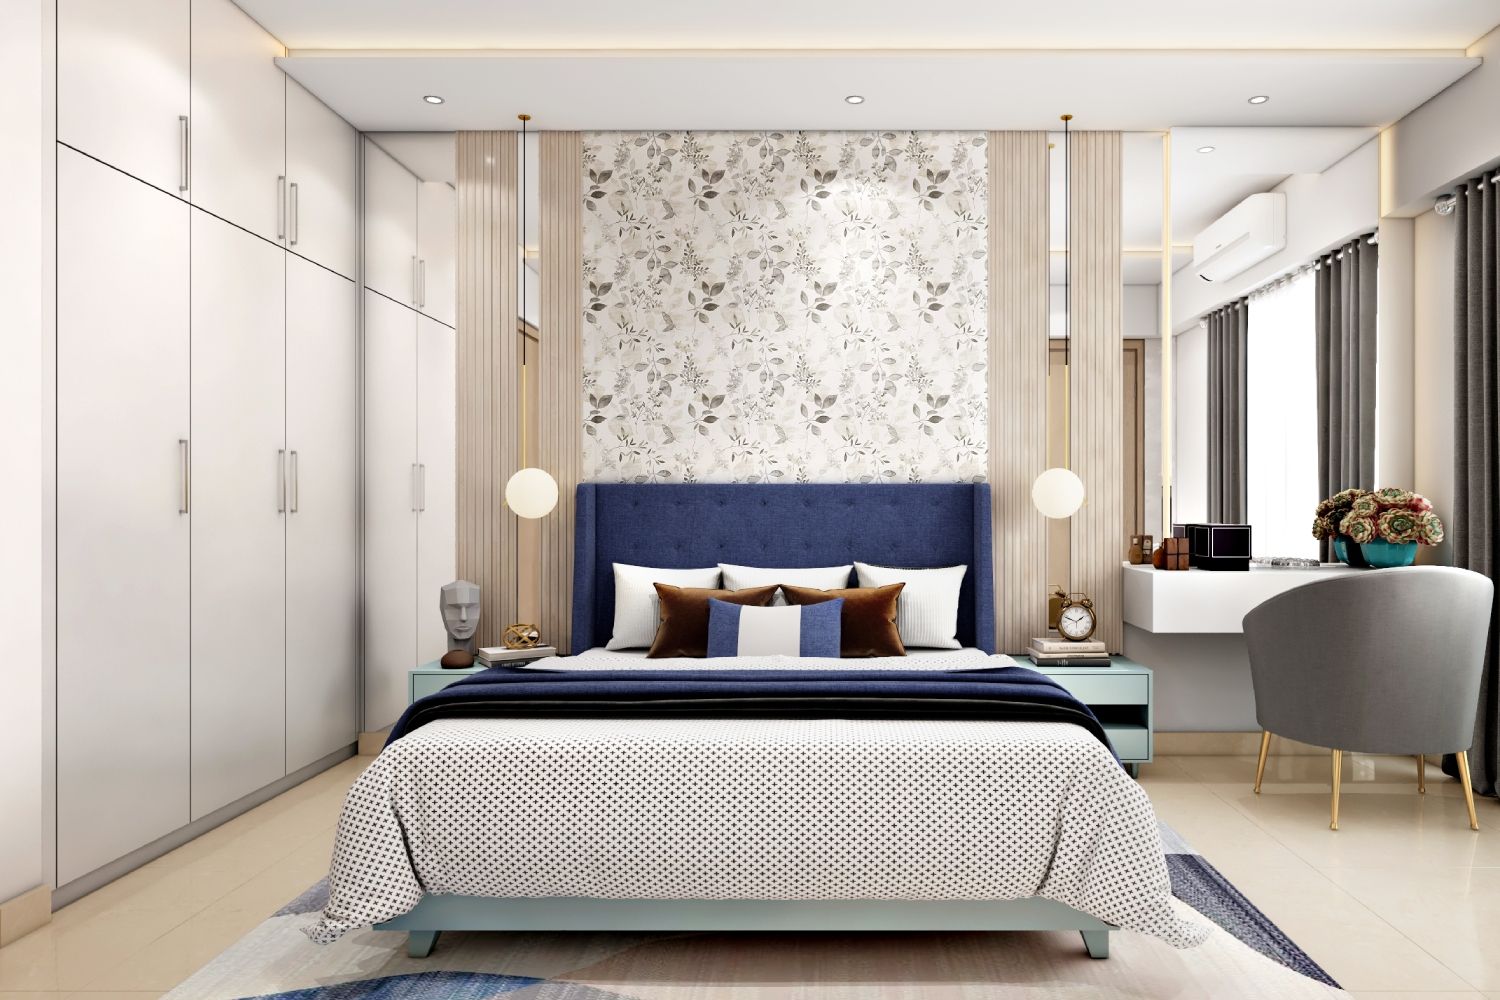 Modern Master Bedroom Design With 3-Door White Swing Wardrobe And Leafy Wallpaper